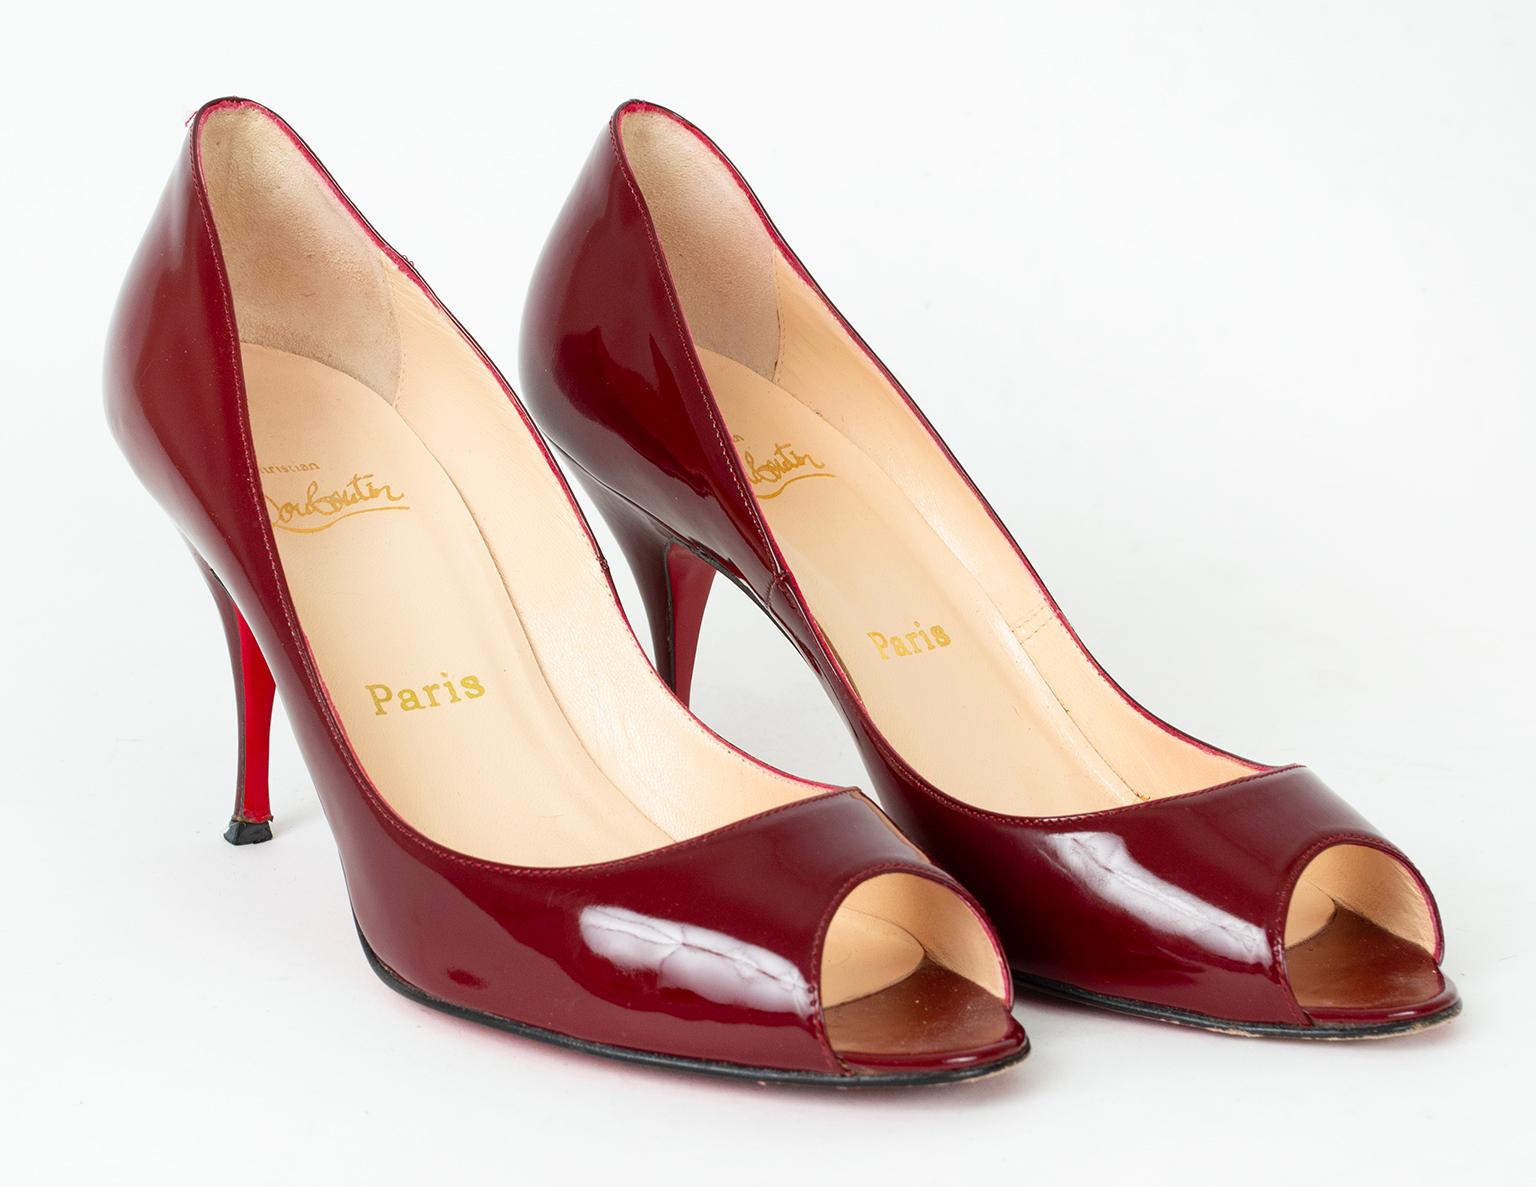 The most walkable (and sculptural) of Louboutin’s heels, the Clare is a dead ringer for a 1950s Roger Vivier hourglass stiletto. And though its more practical heel easily sells the shoe, its standout feature is its color: a near perfect match for